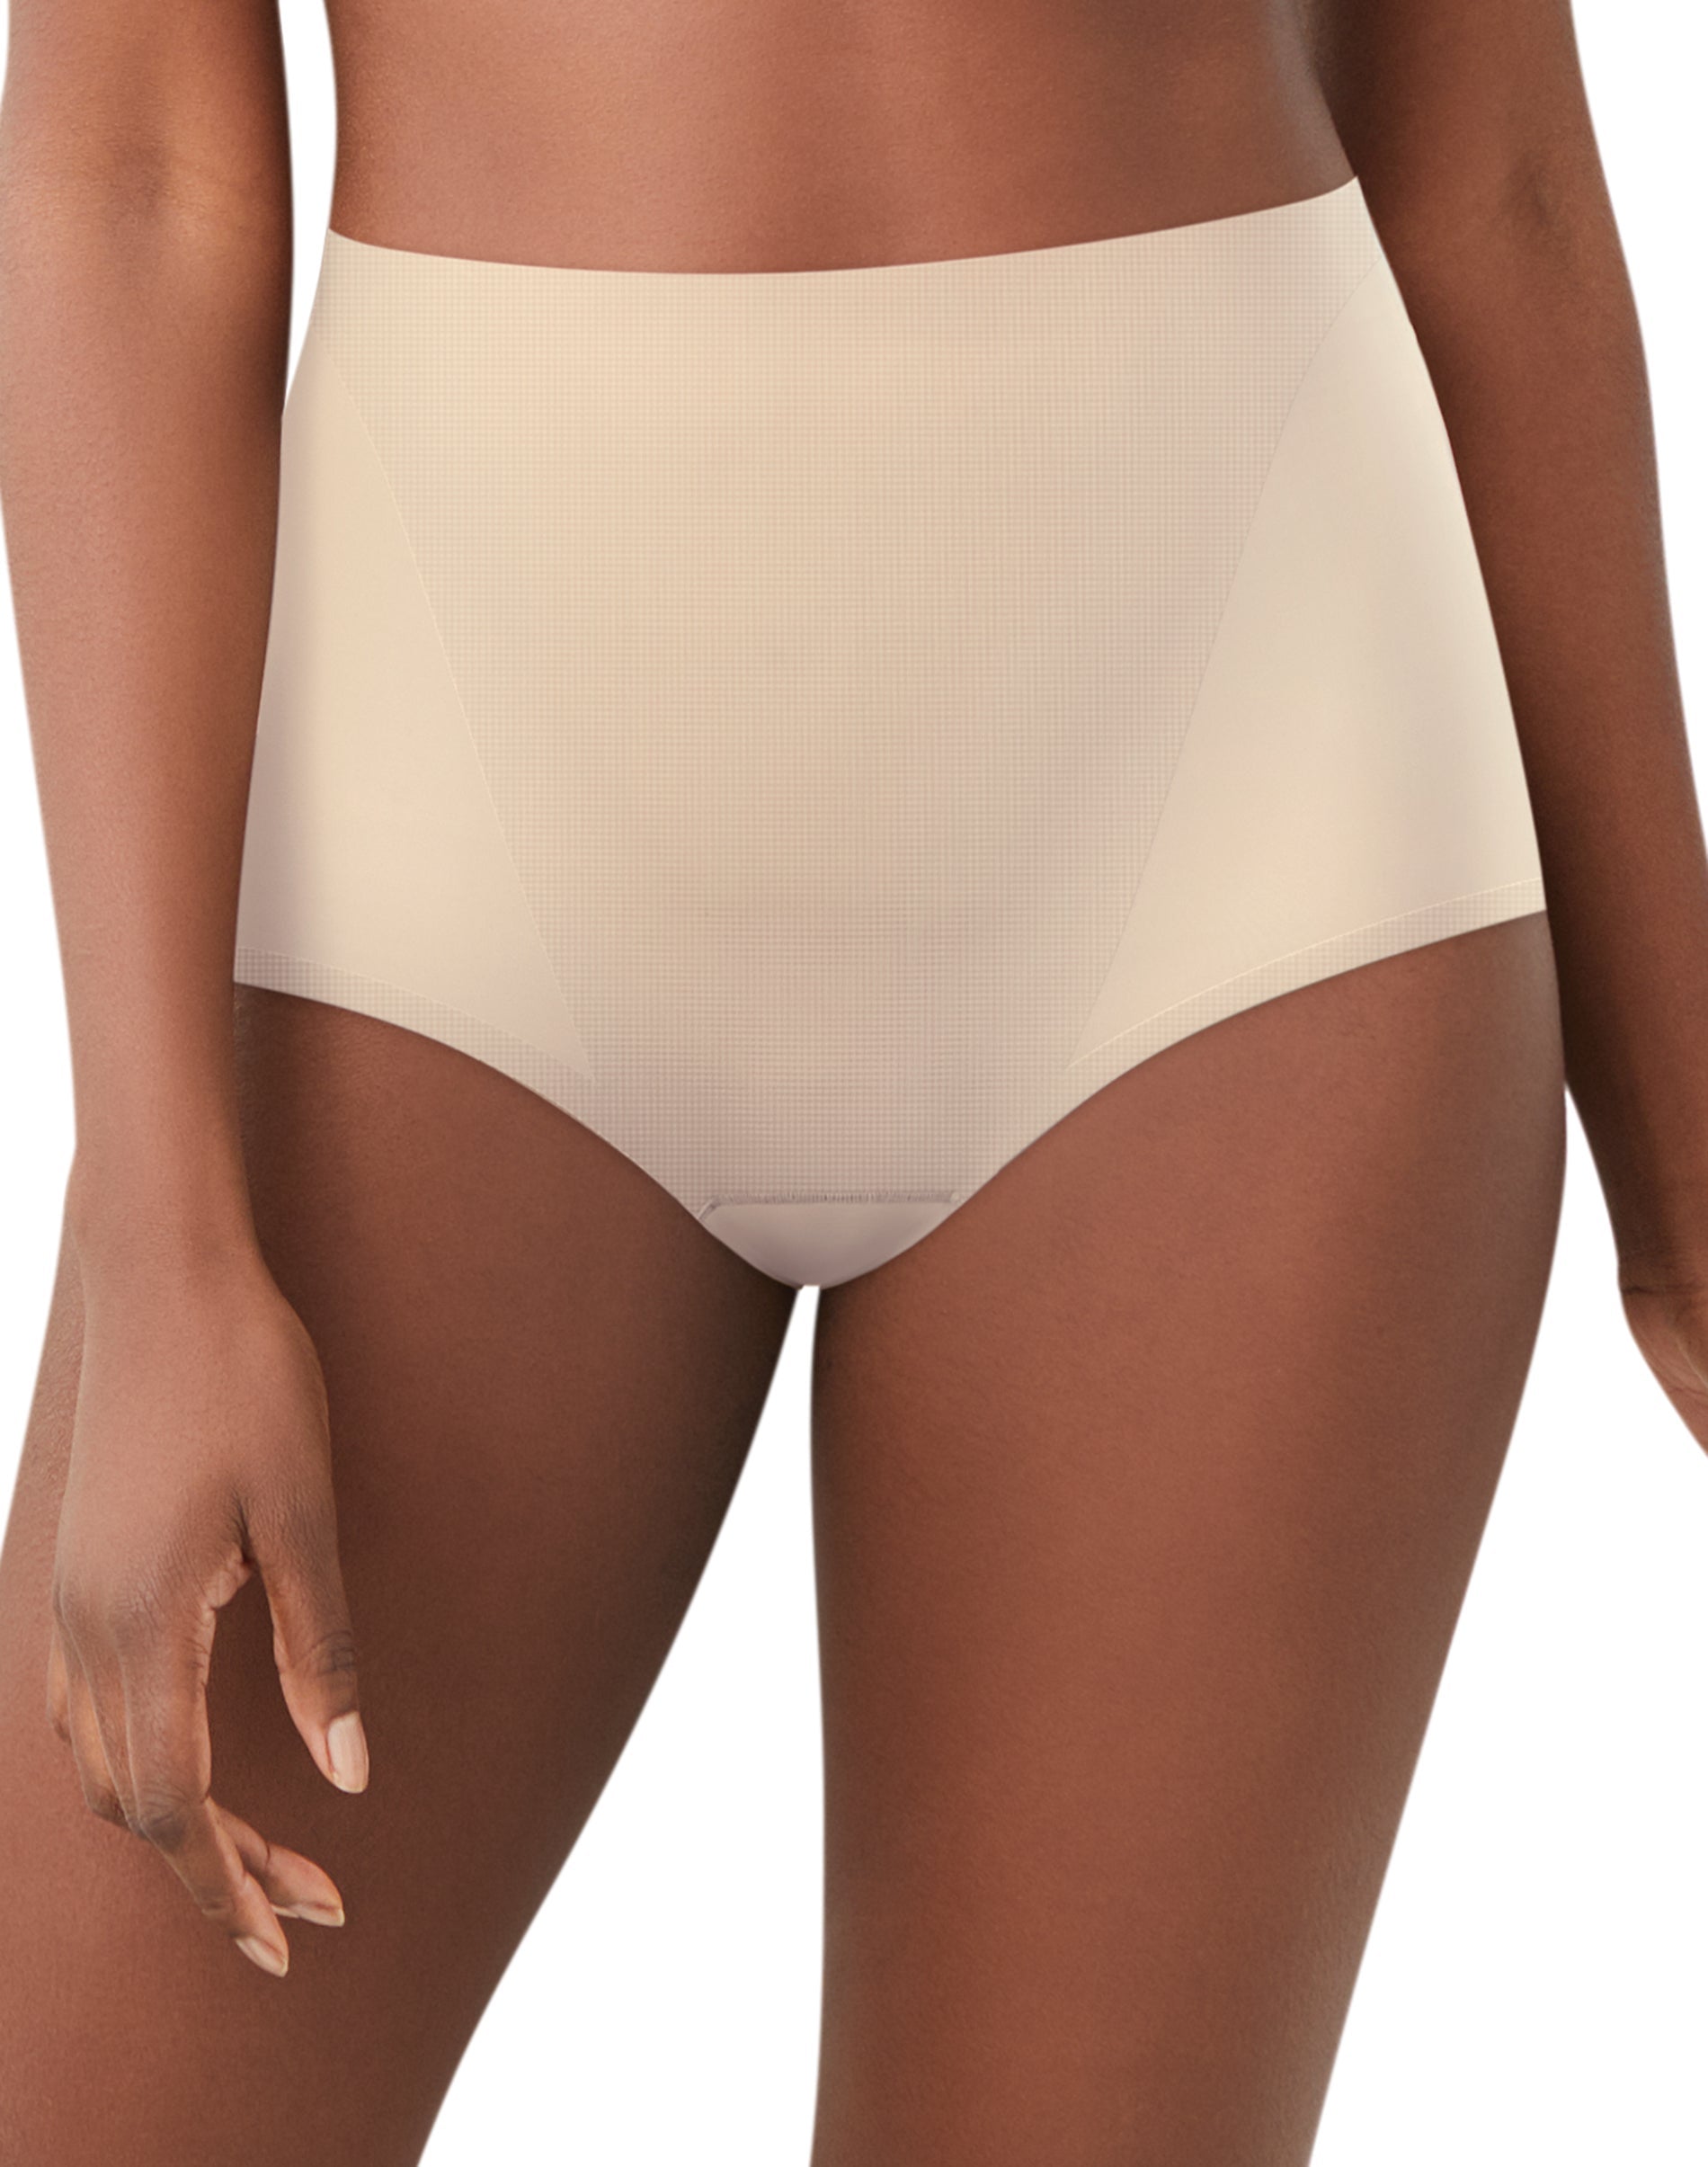 DFS059 - Bali Womens Comfort Revolution EasyLite Smoothing Brief 2-Pack